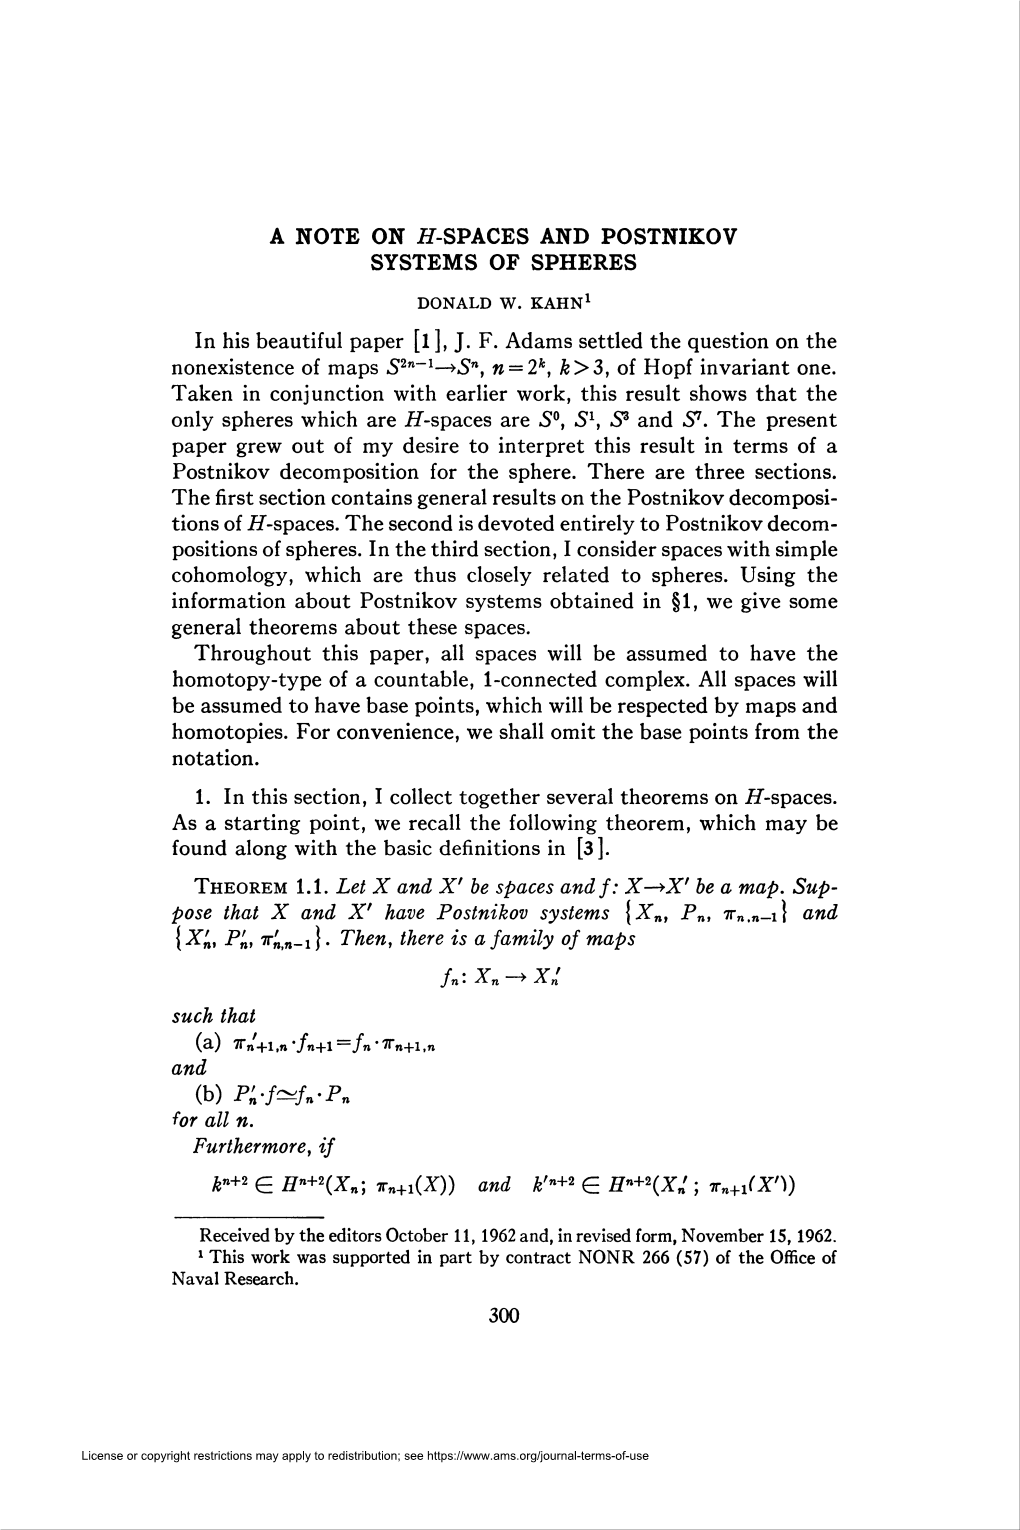 A NOTE on Ii-SPACES and POSTNIKOV SYSTEMS of SPHERES